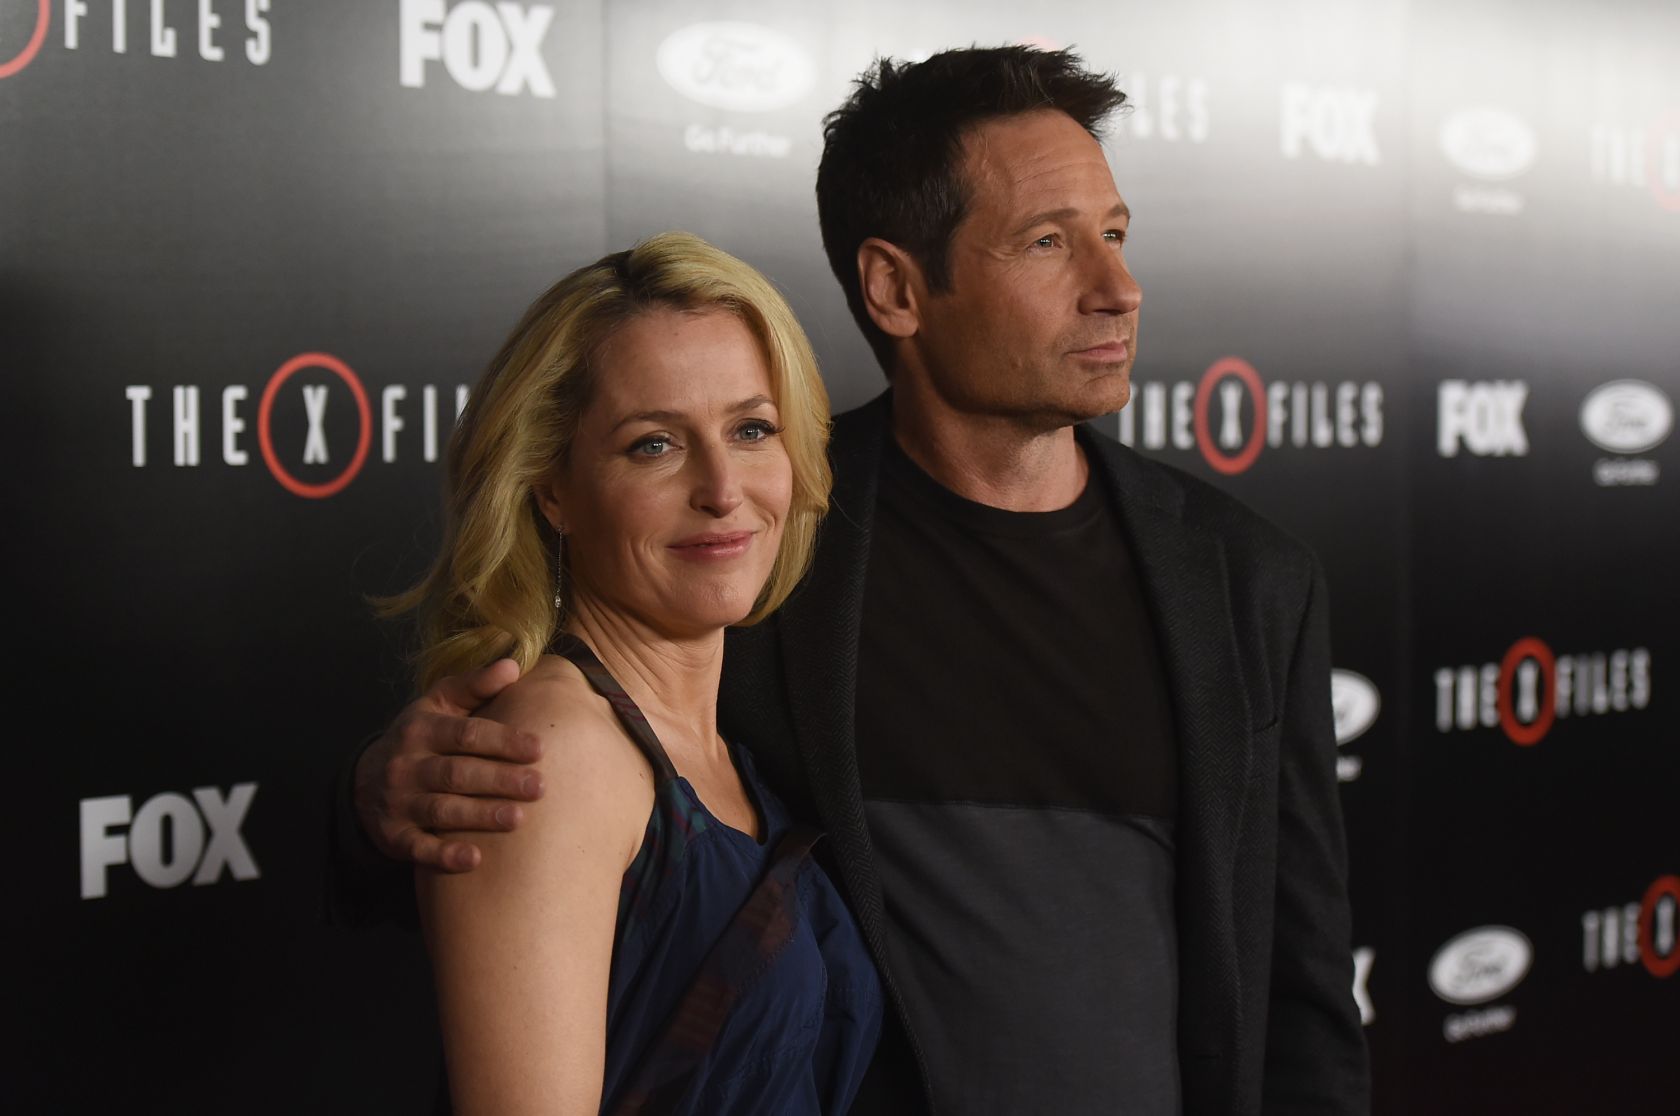 Premiere Of Fox's 'The X-Files' - Red Carpet